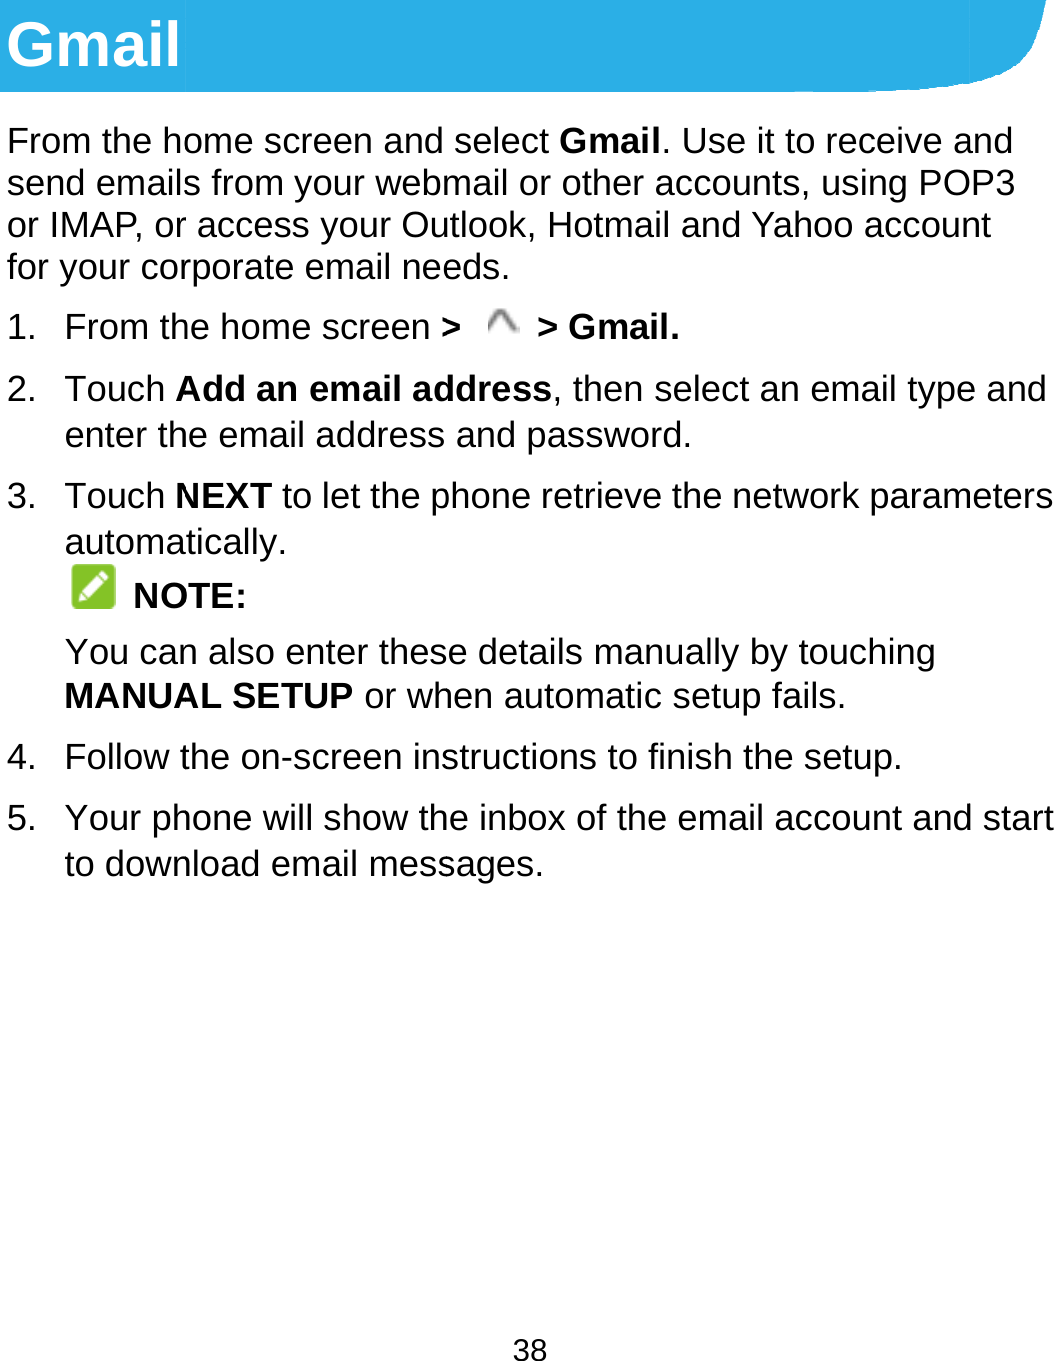  Gmail From the hosend emailsor IMAP, orfor your cor1. From th2. Touch Aenter th3. Touch Nautoma NOYou canMANUA4. Follow t5. Your phto down  ome screen and s from your webmr access your Ourporate email neehe home screen &gt;Add an email adhe email address NEXT to let the ptically. OTE: n also enter thesAL SETUP or whthe on-screen inshone will show thnload email mess38 select Gmail. Umail or other accutlook, Hotmail aneds. &gt;  &gt; Gmail.ddress, then seleand password.phone retrieve thee details manualhen automatic sestructions to finise inbox of the emsages.  se it to receive acounts, using POnd Yahoo accounect an email typee network paramlly by touching etup fails. sh the setup. mail account andand P3 nt e and meters d start 